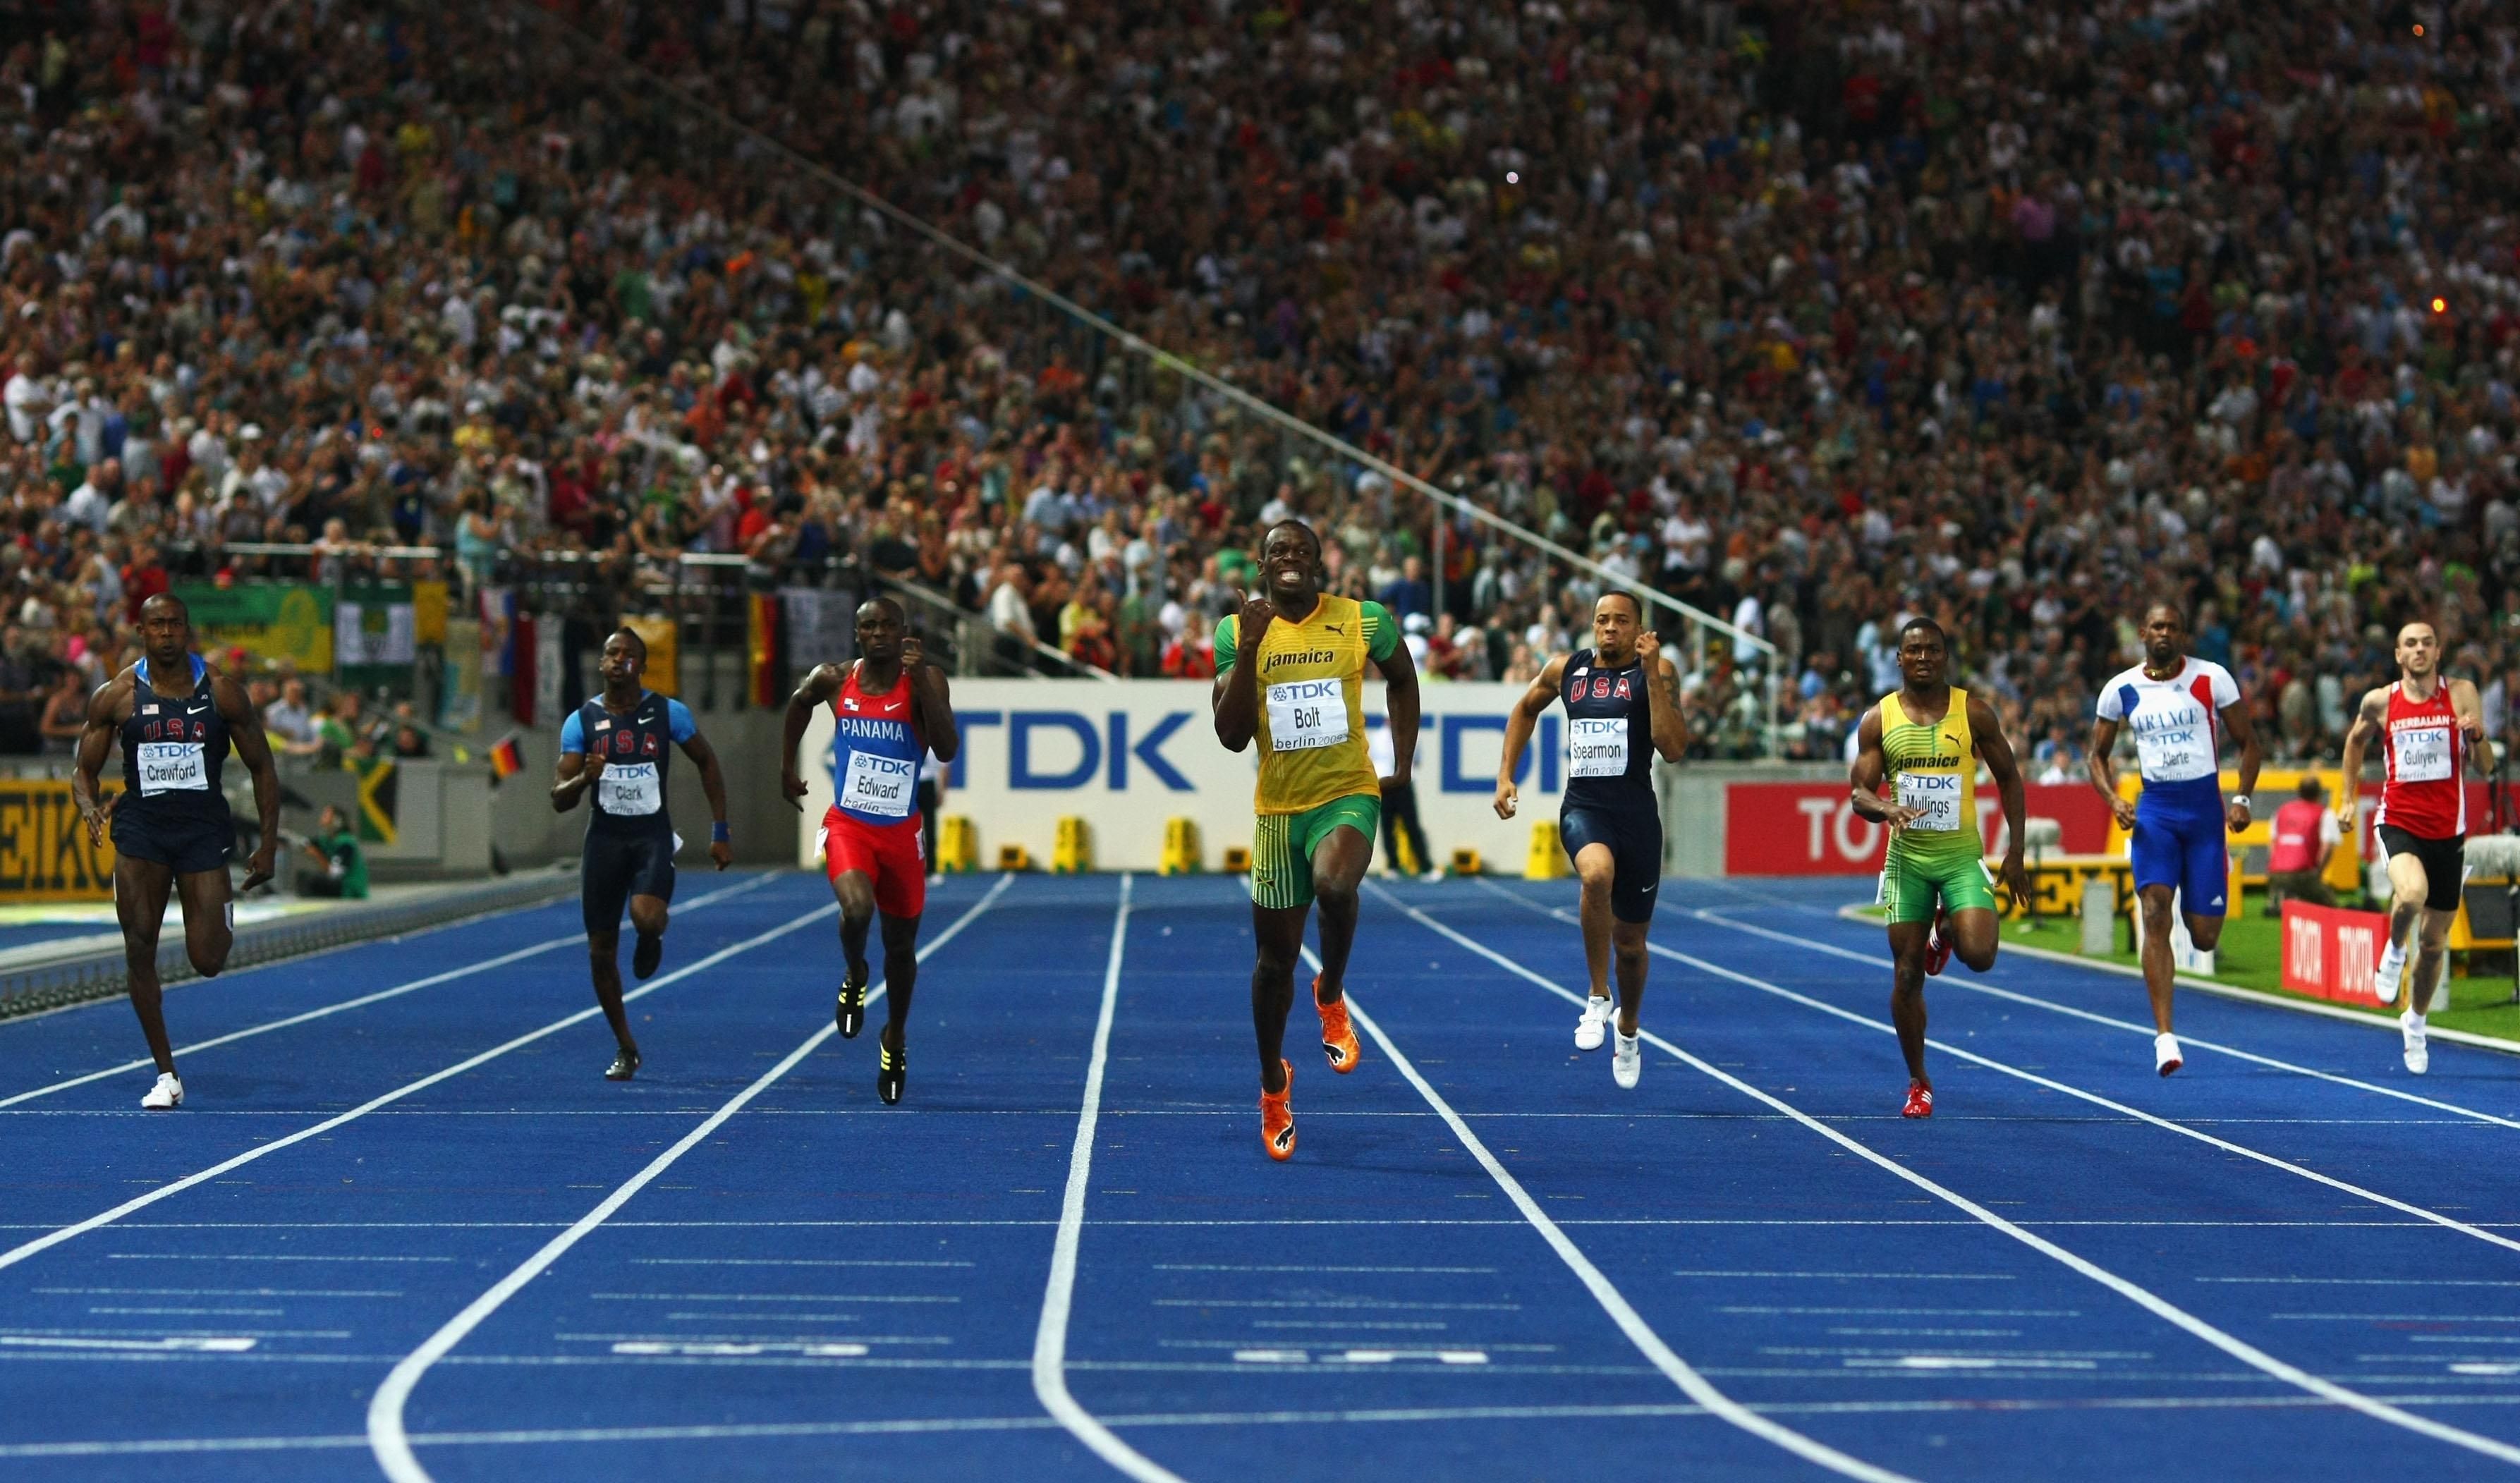 Usain Bolt of Jamaica on his way to setting the quickest 200m time in history in the Berlin Olympic Stadium during the IAAF World Championships in 2009